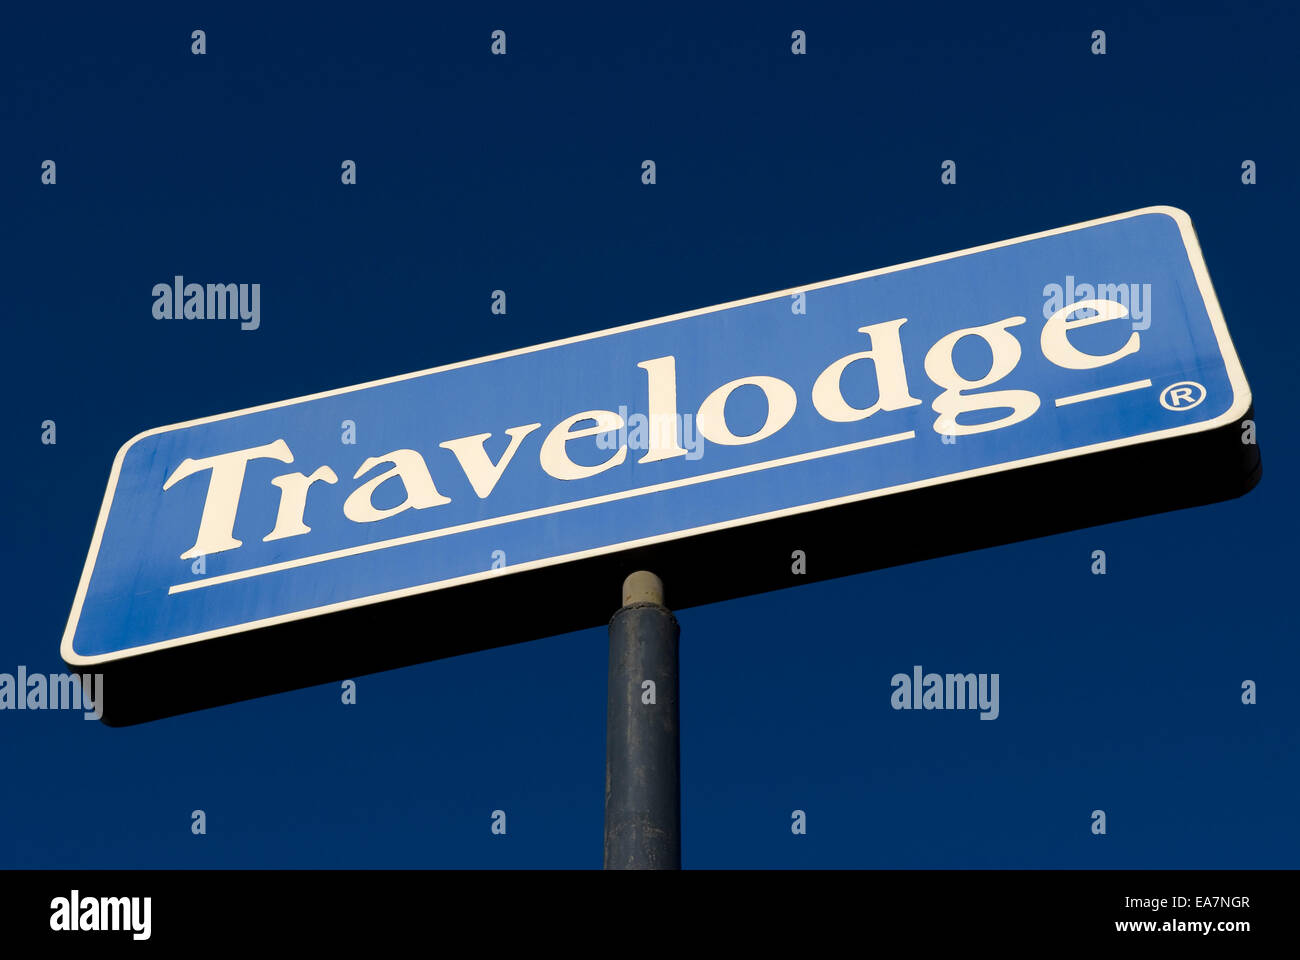 Travelodge Sign Store by